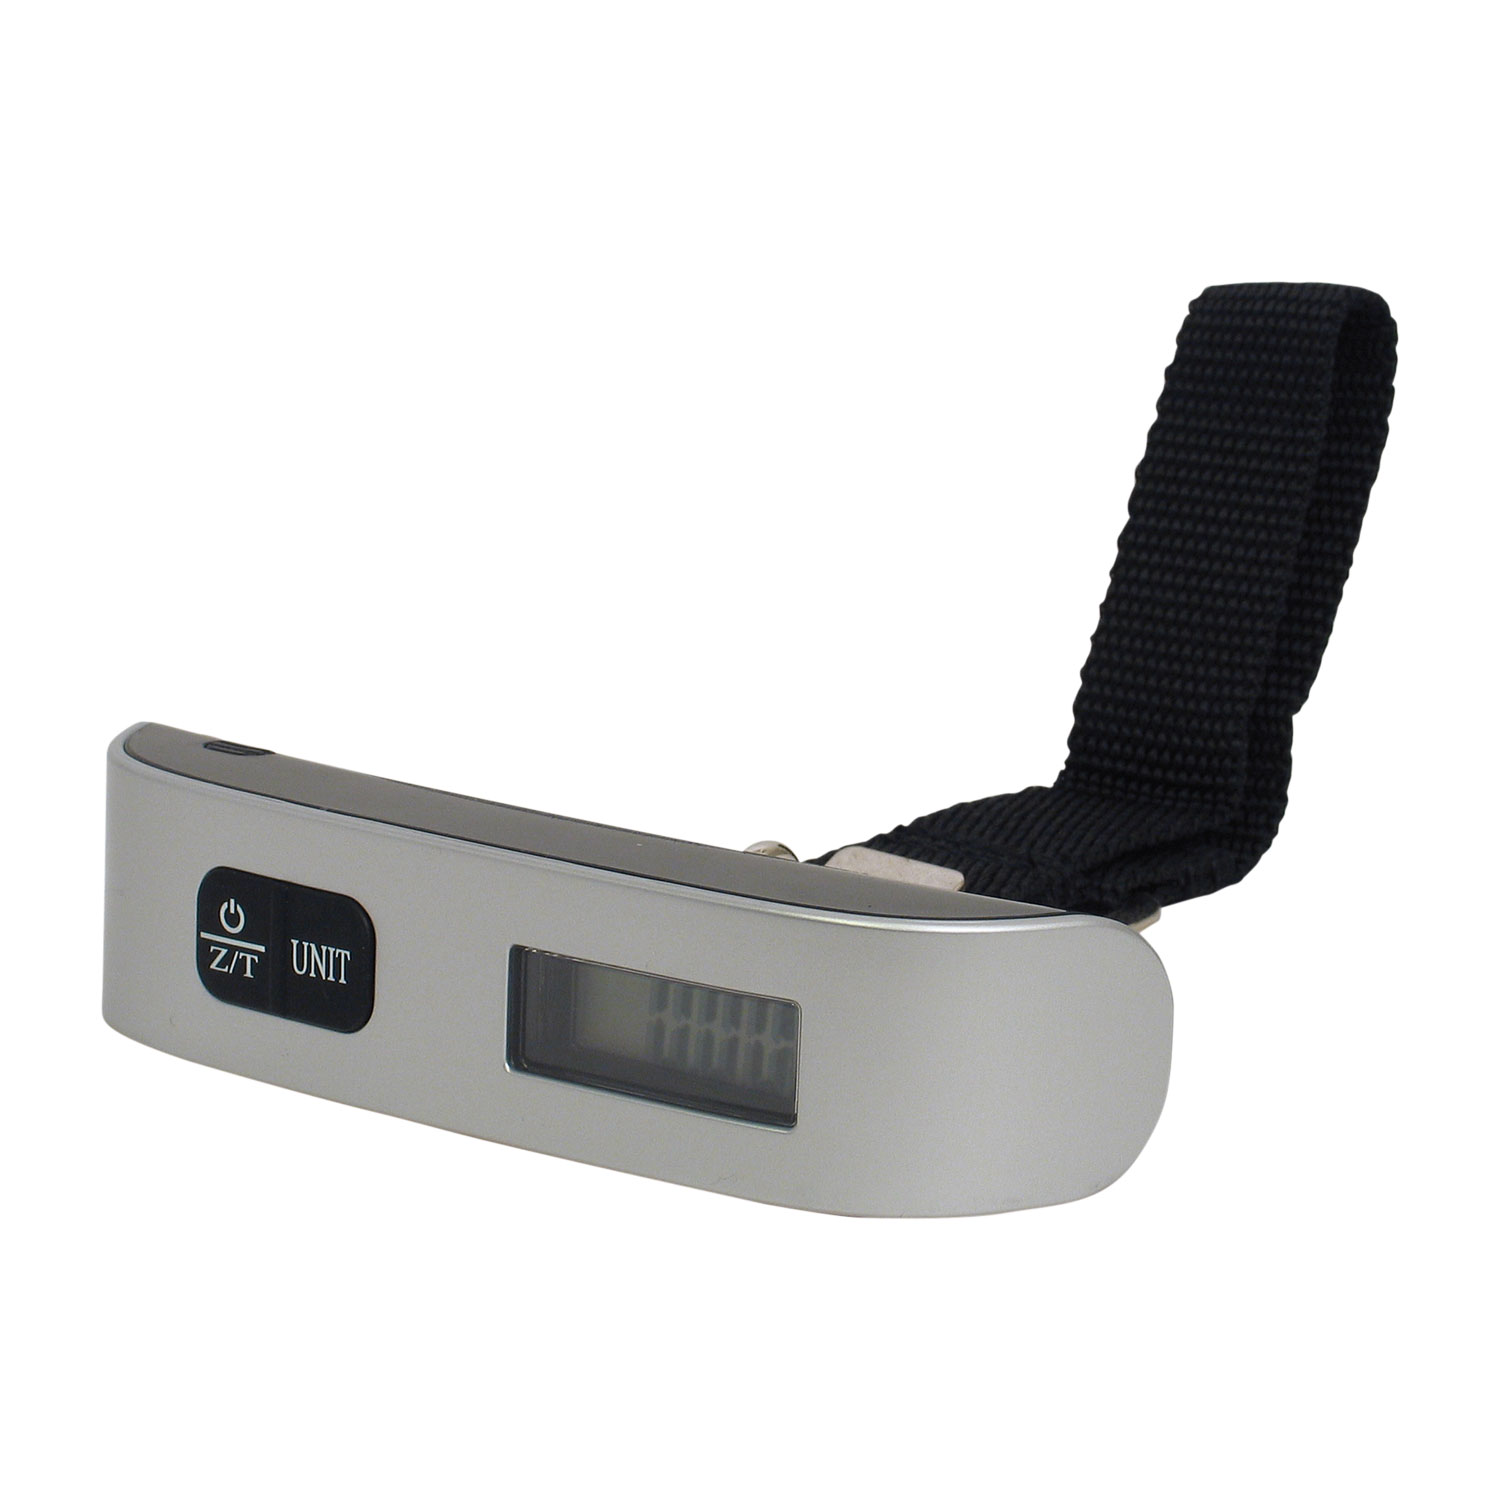 Luggage scale max. 50 kg